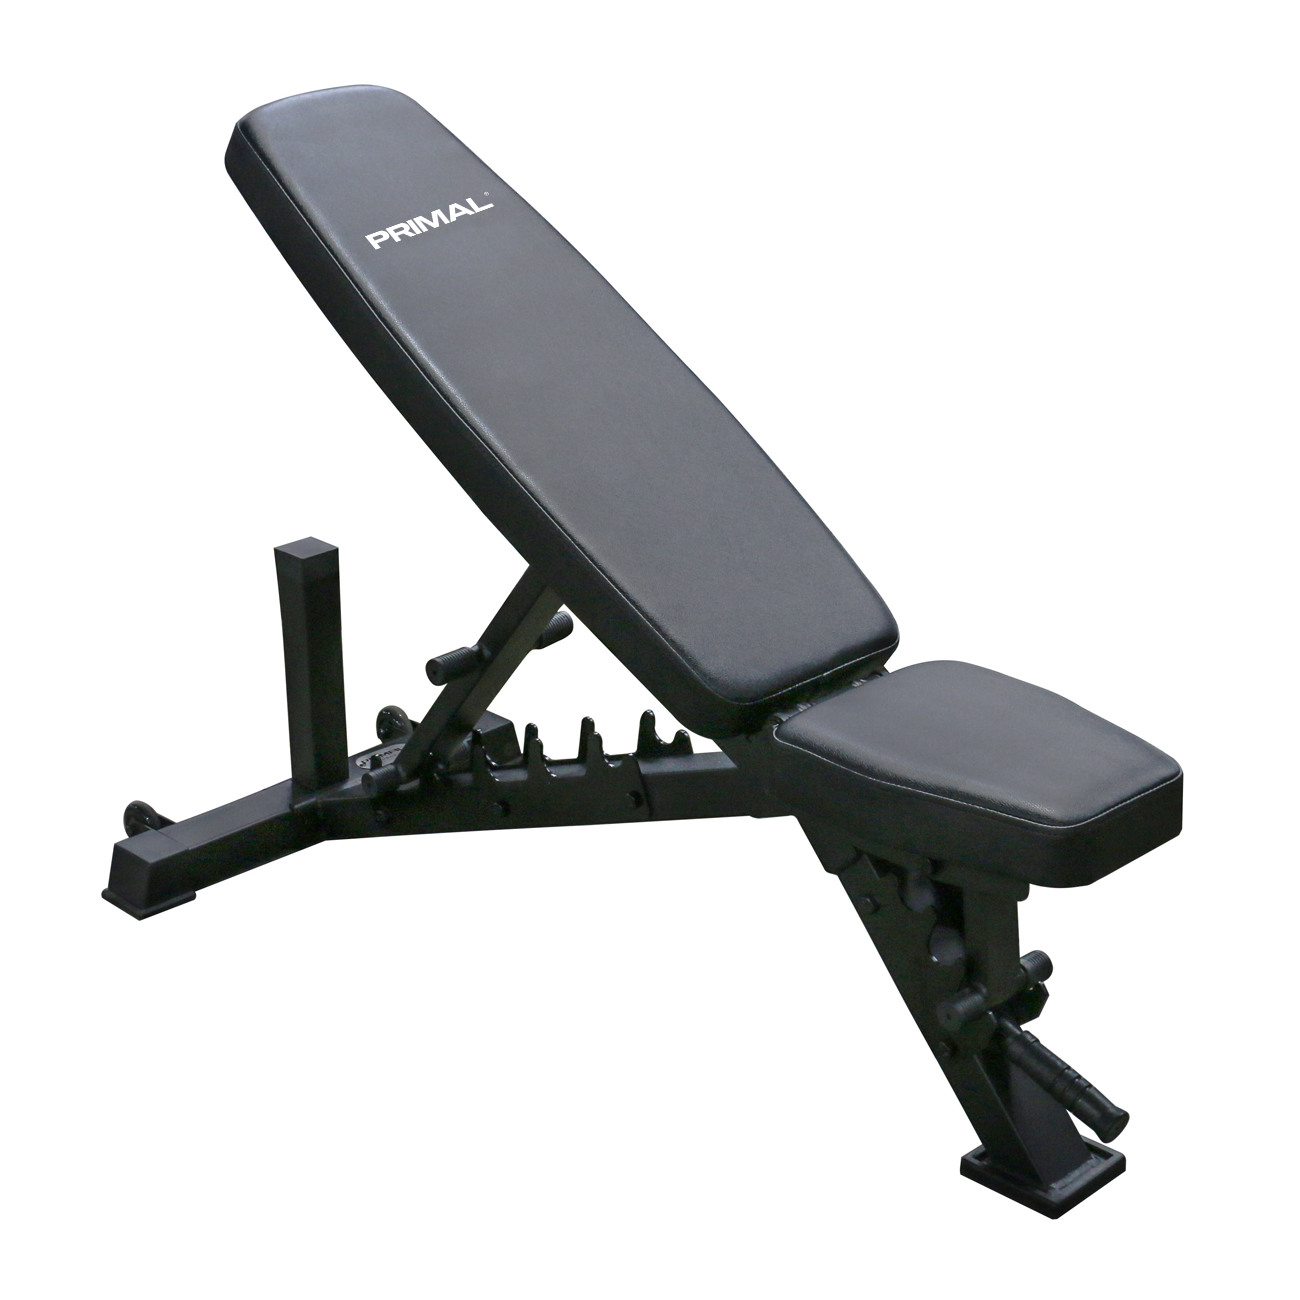 Home Weight Bench  Adjustable Gym Bench - Primal Strength